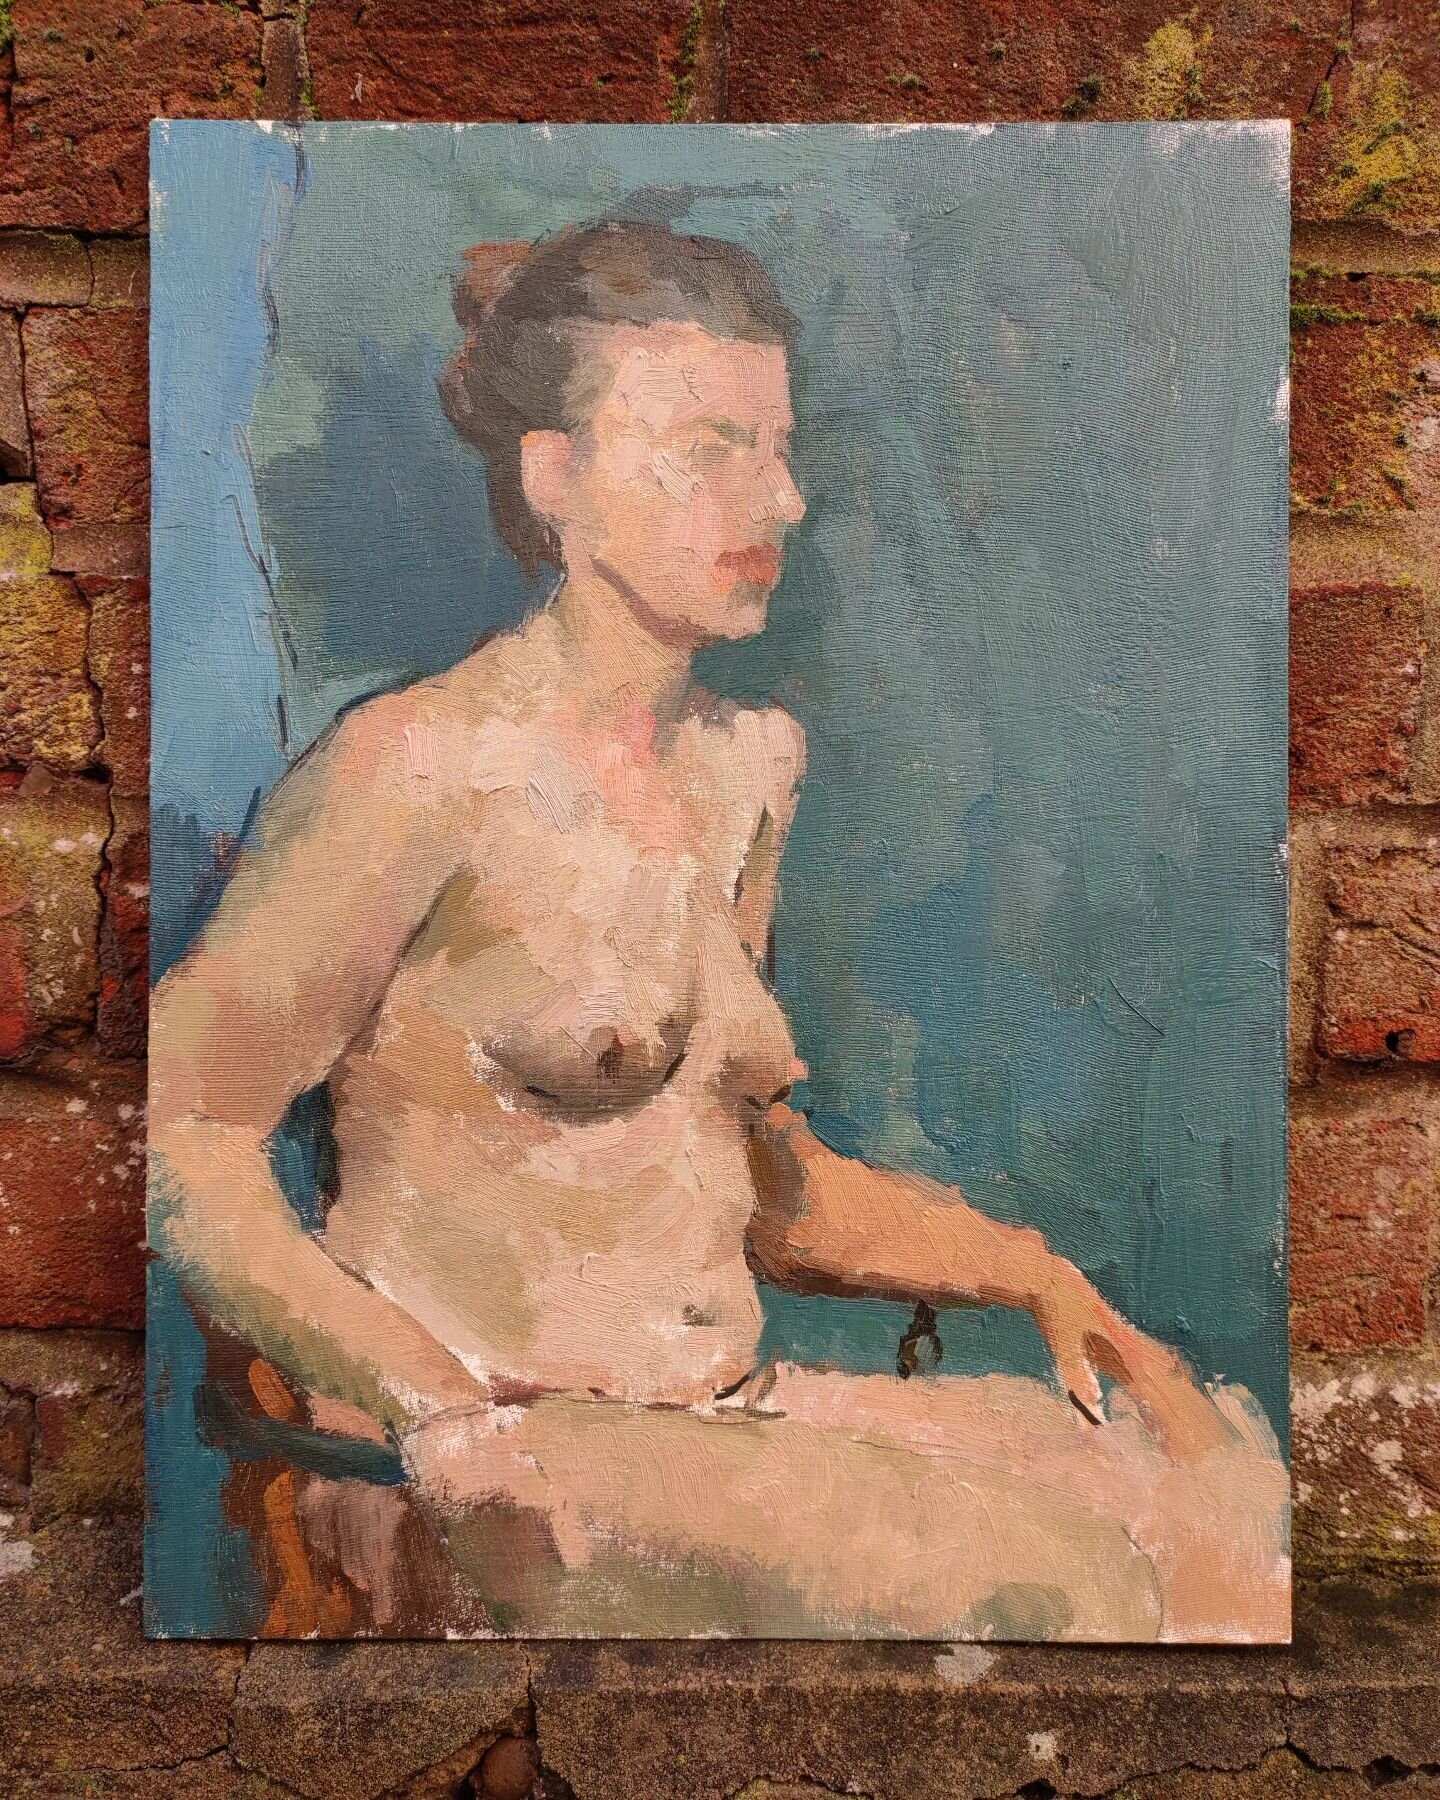 Francoise 'Fiquet' 20.11.22
12 x 16&quot;
Oil on board
@chertseyartists 
#lifepainting #nude #oilpainting